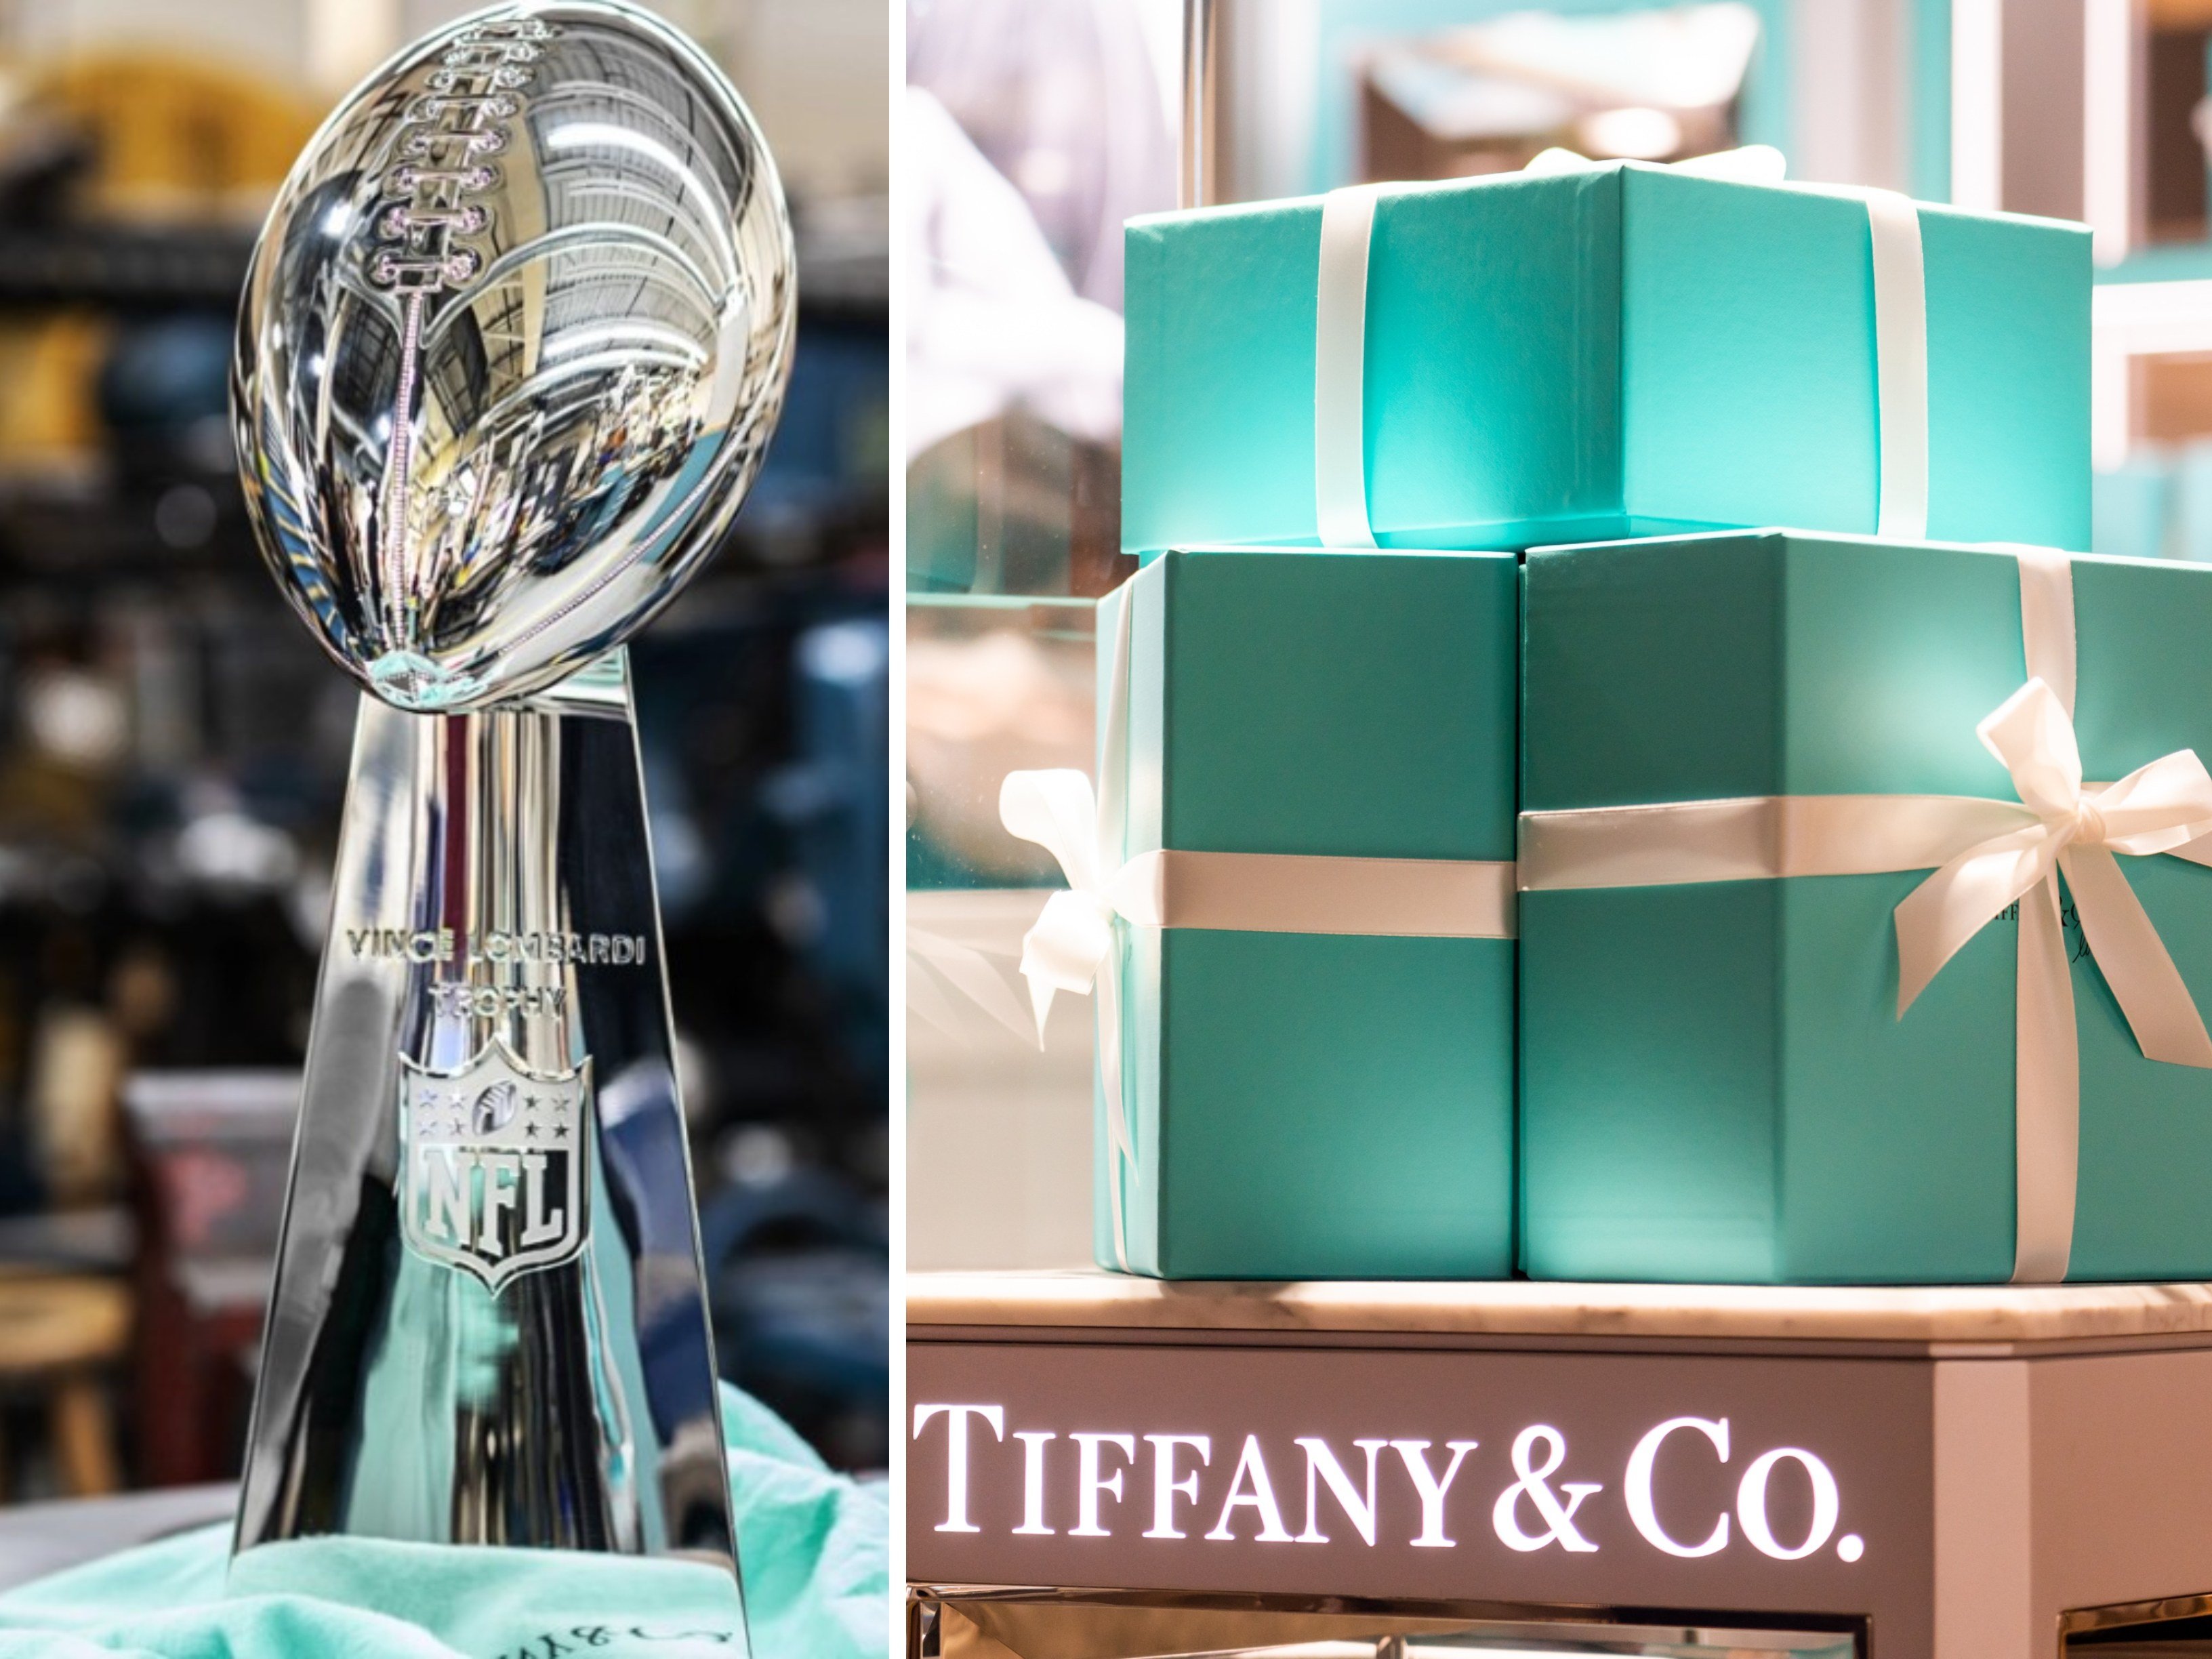 How does Tiffany & Co. make the Super Bowl trophy? The LVMH